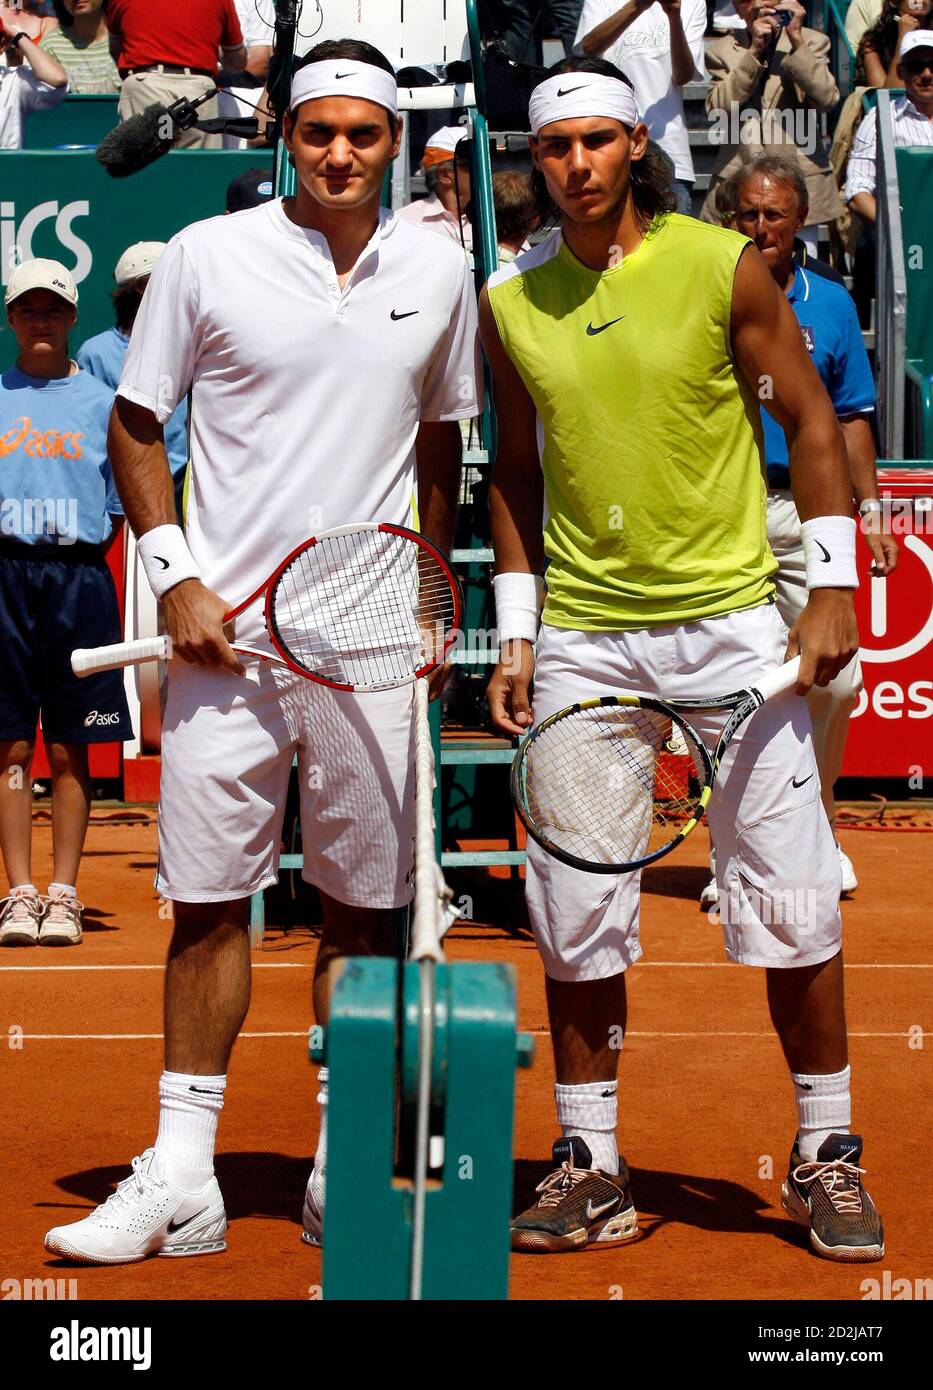 Roger Federer of Switzerland (L) poses with Rafael Nadal of Spain before  the finals of the Monte Carlo tennis open in Monaco April 23, 2006.  REUTERS/Eric Gaillard Stock Photo - Alamy